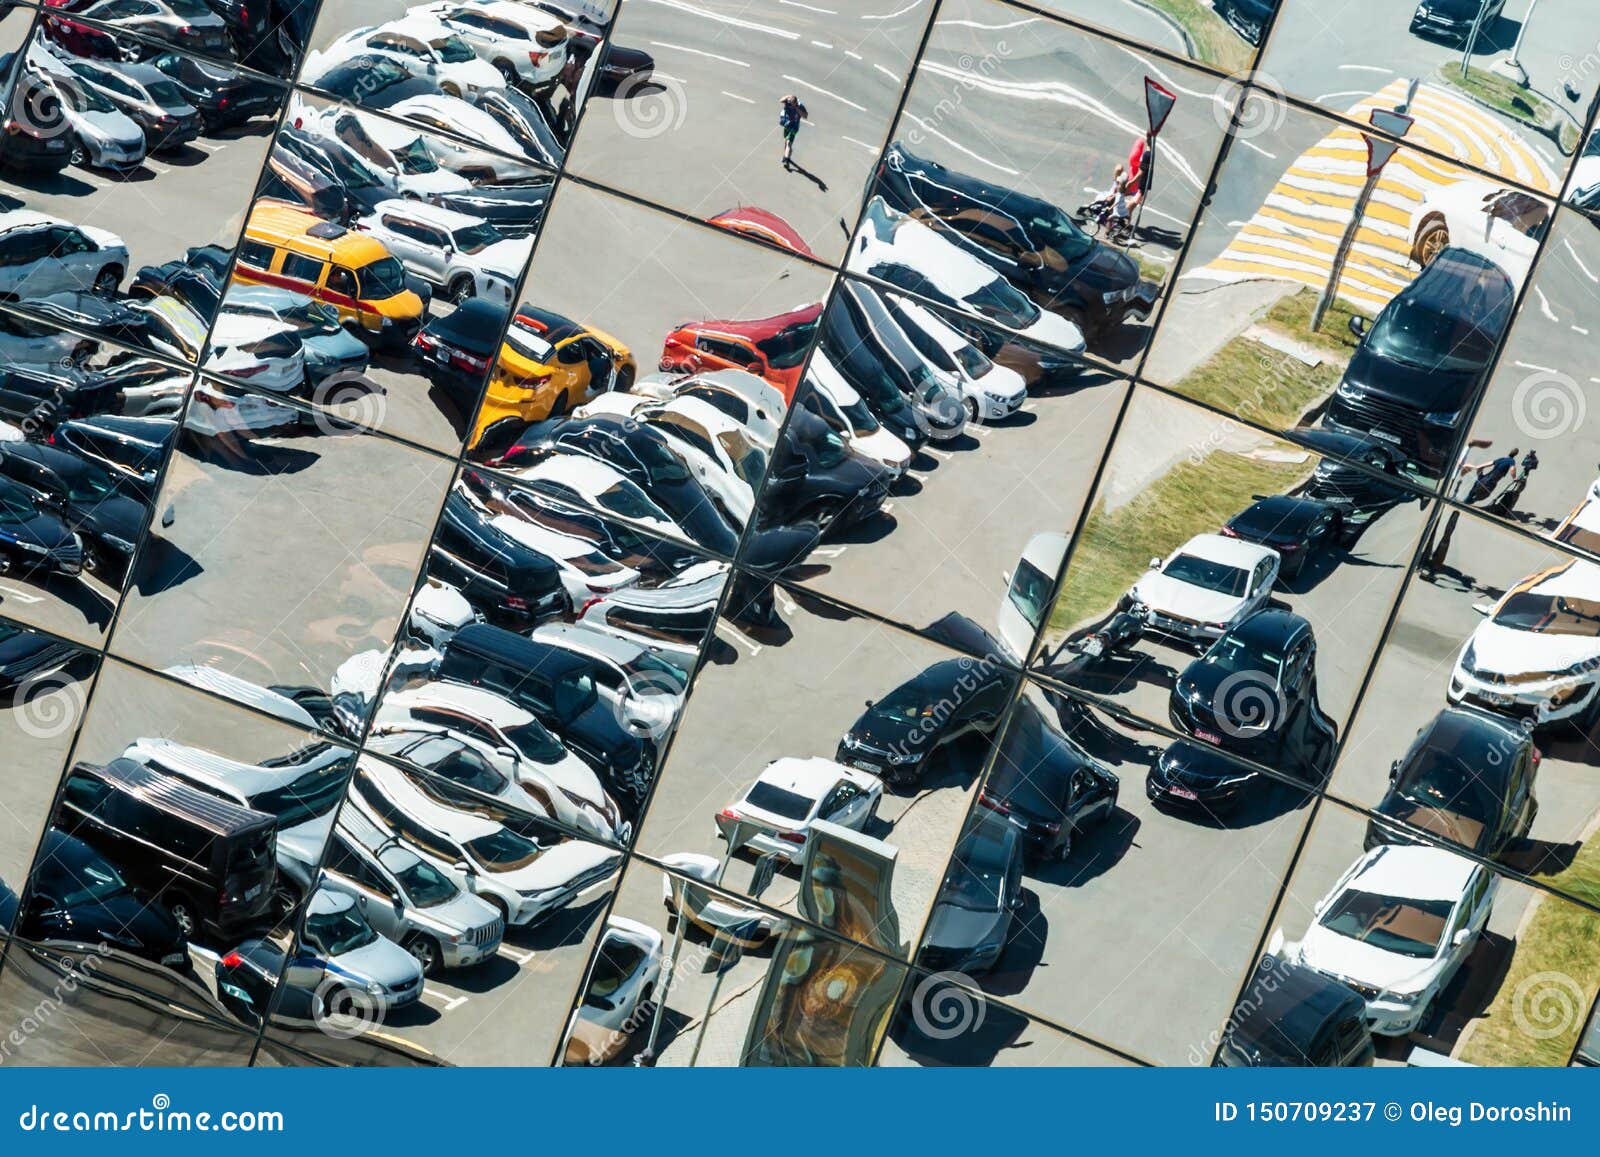 Reflection in the Glass Roof of the Parking Lot Stock Image - Image of background, blue: